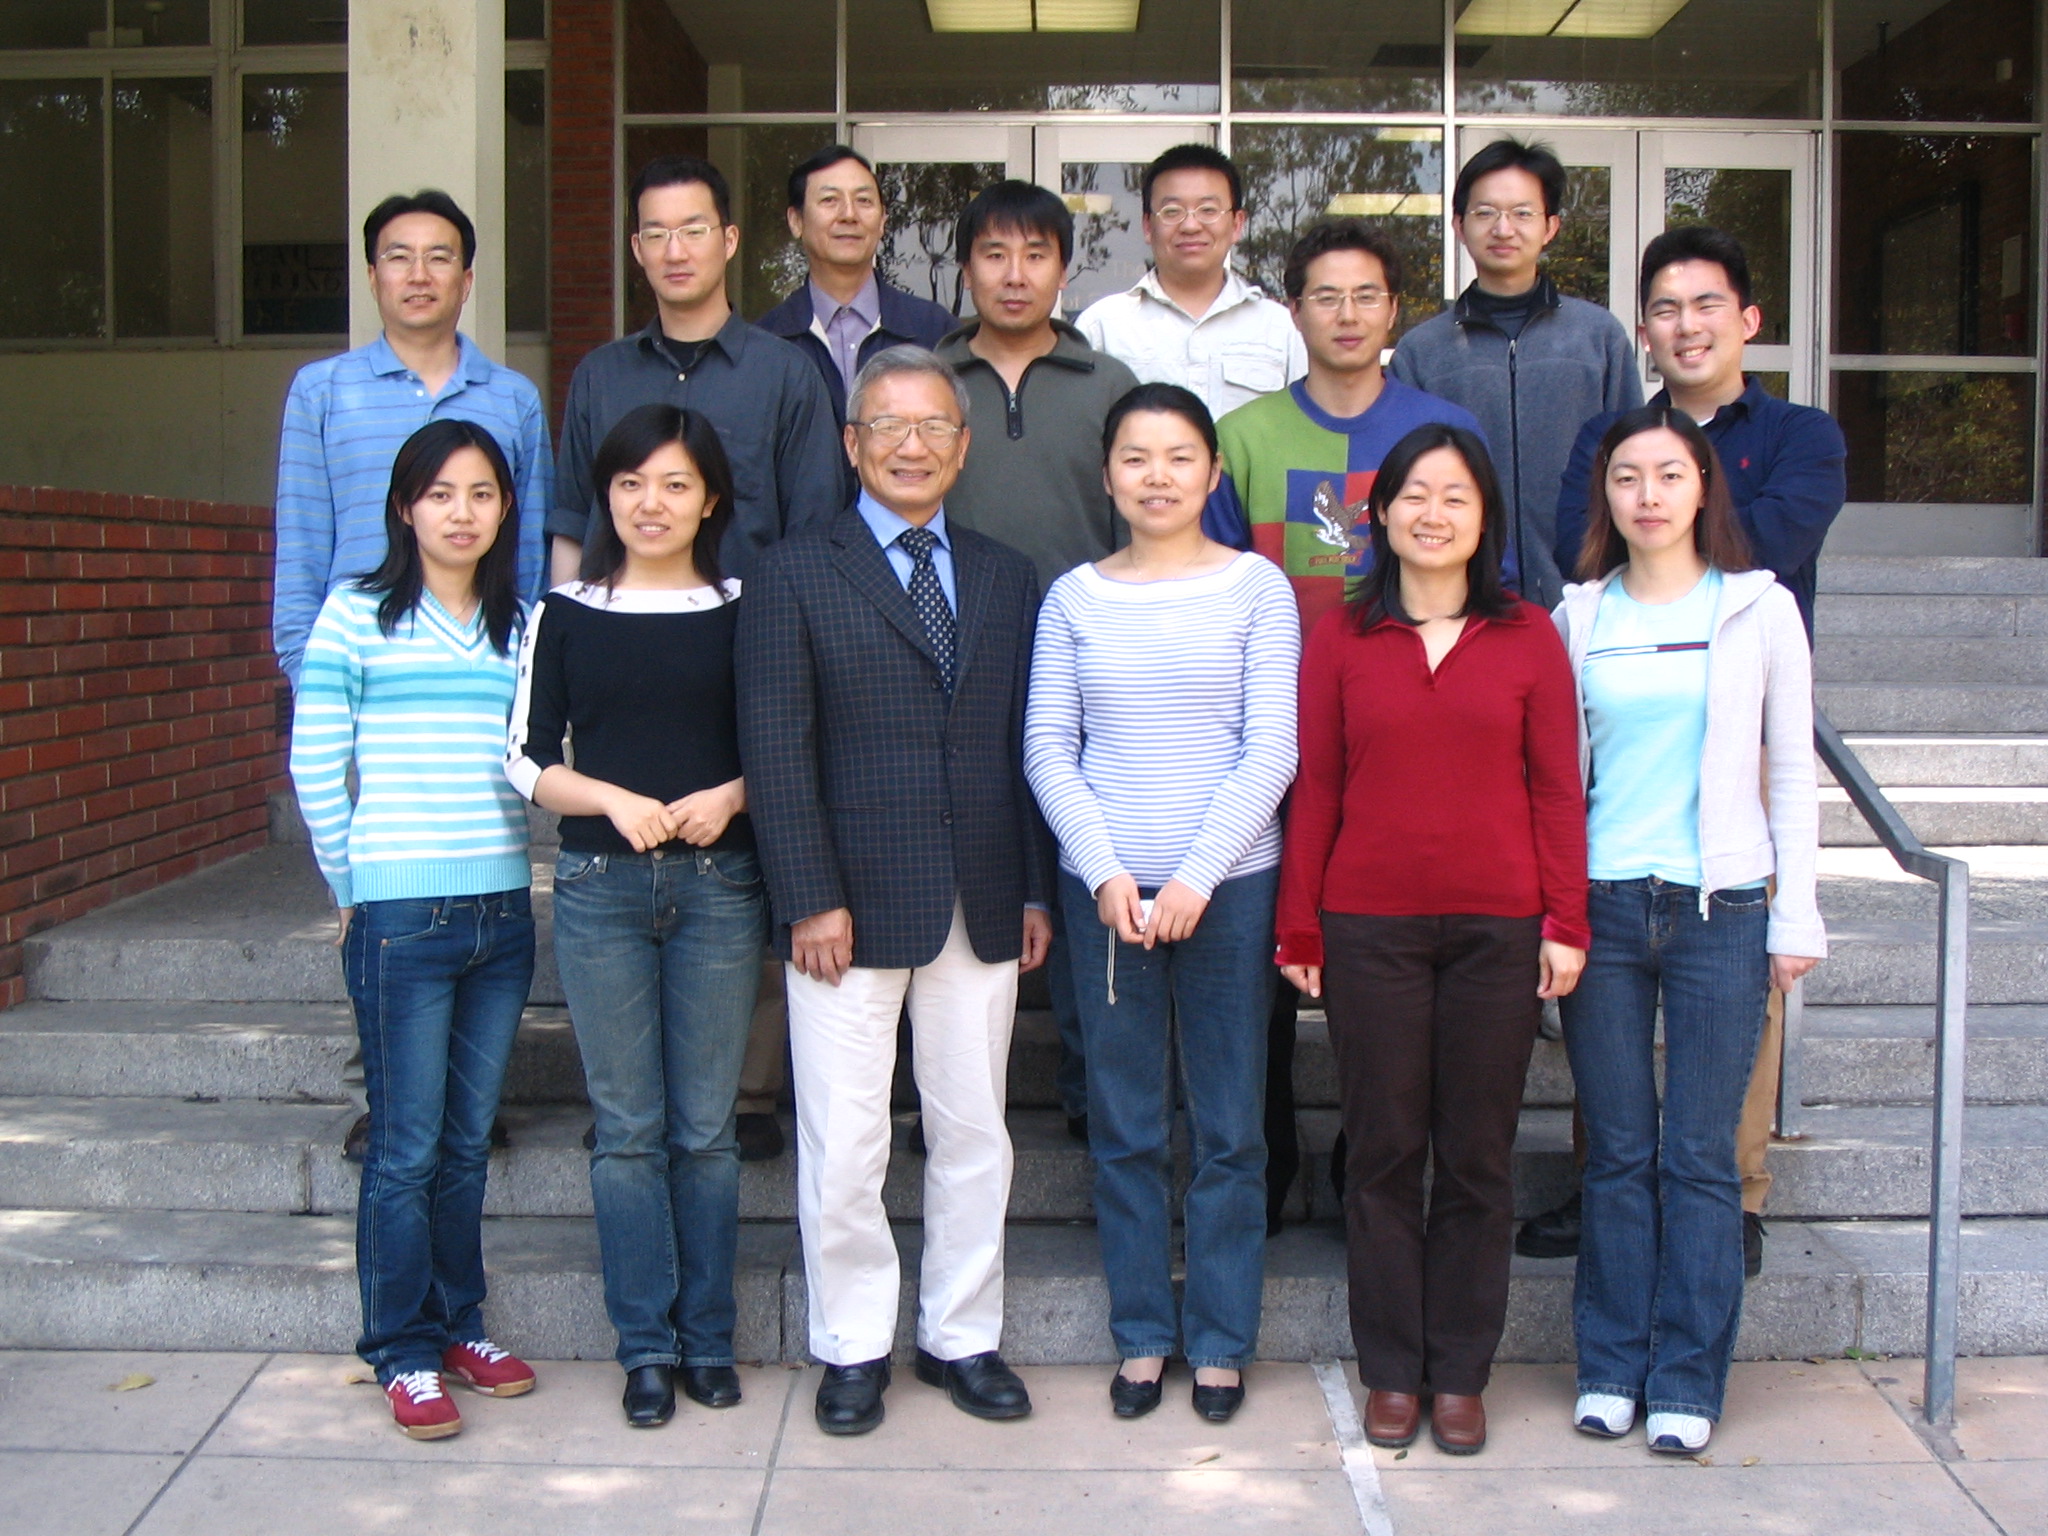 2006 group picture